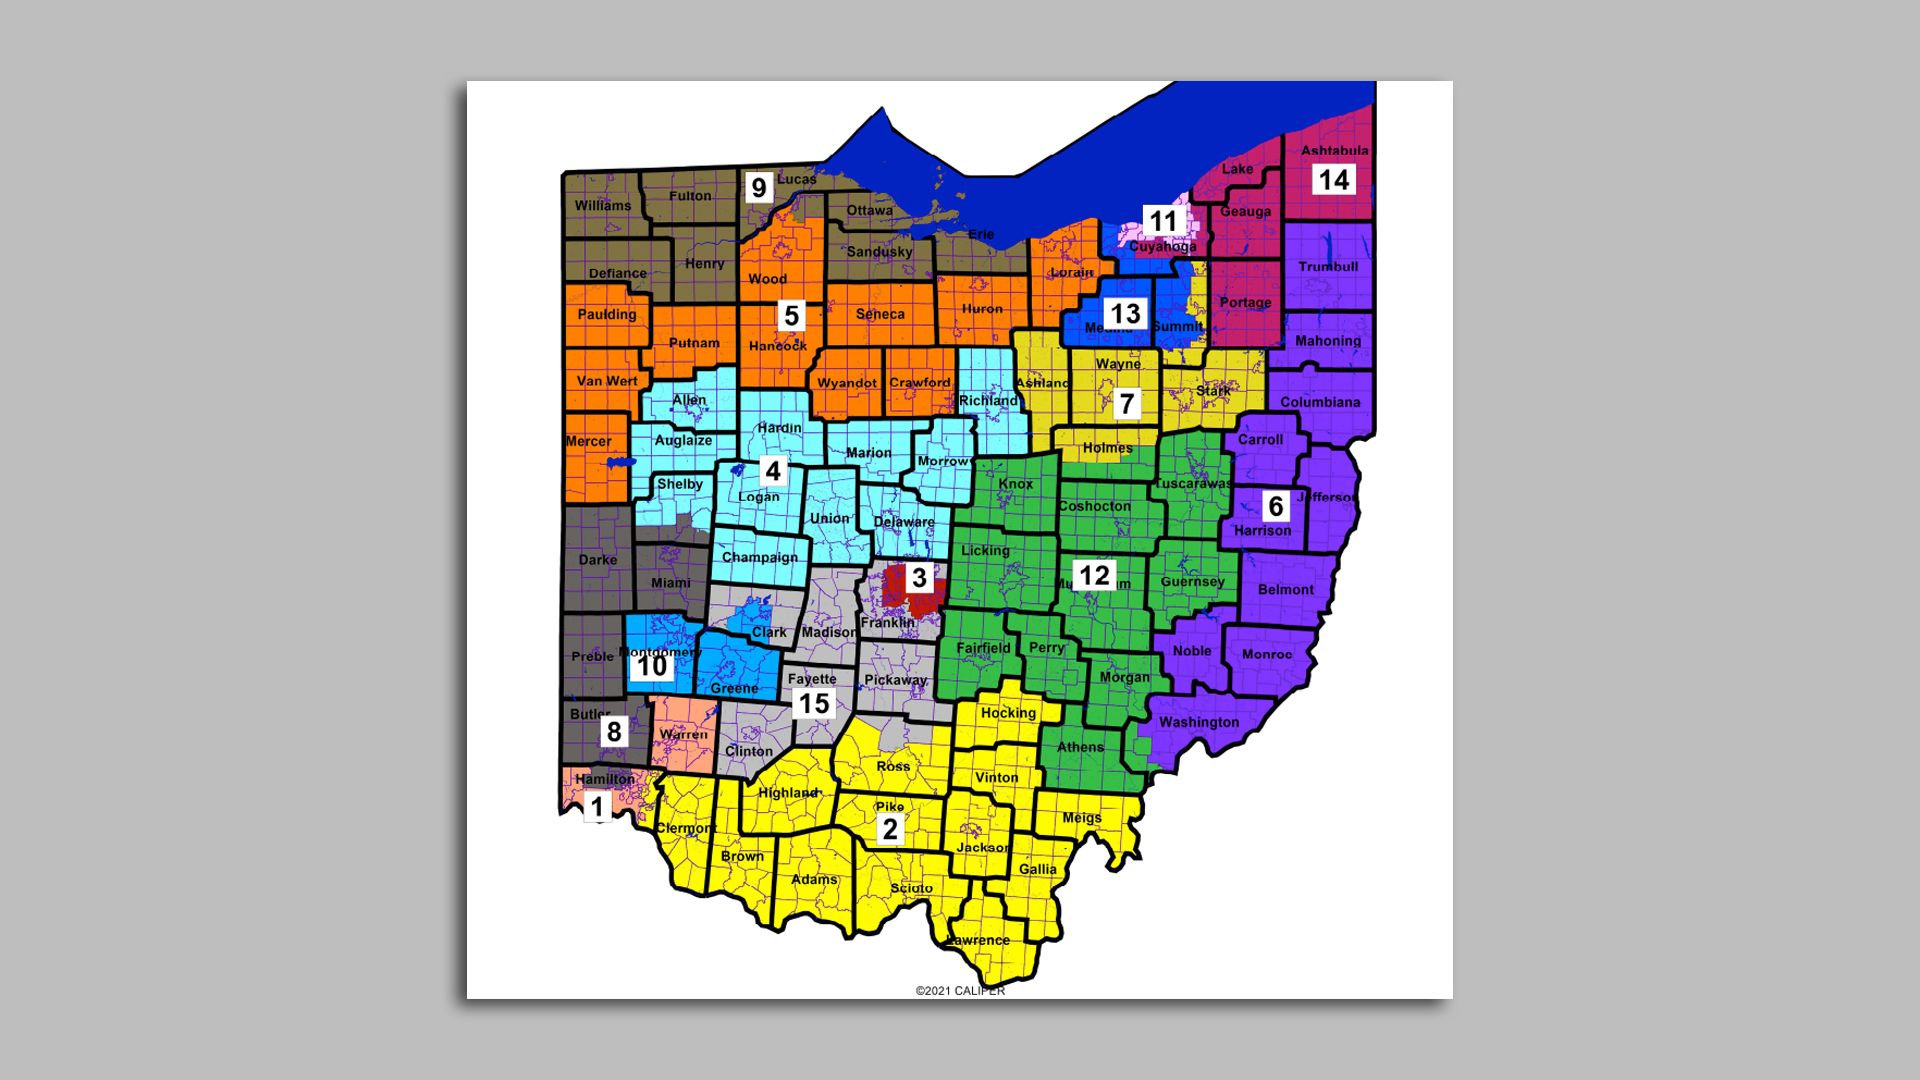 The new Ohio congressional map with 15 separately-shaded districts.